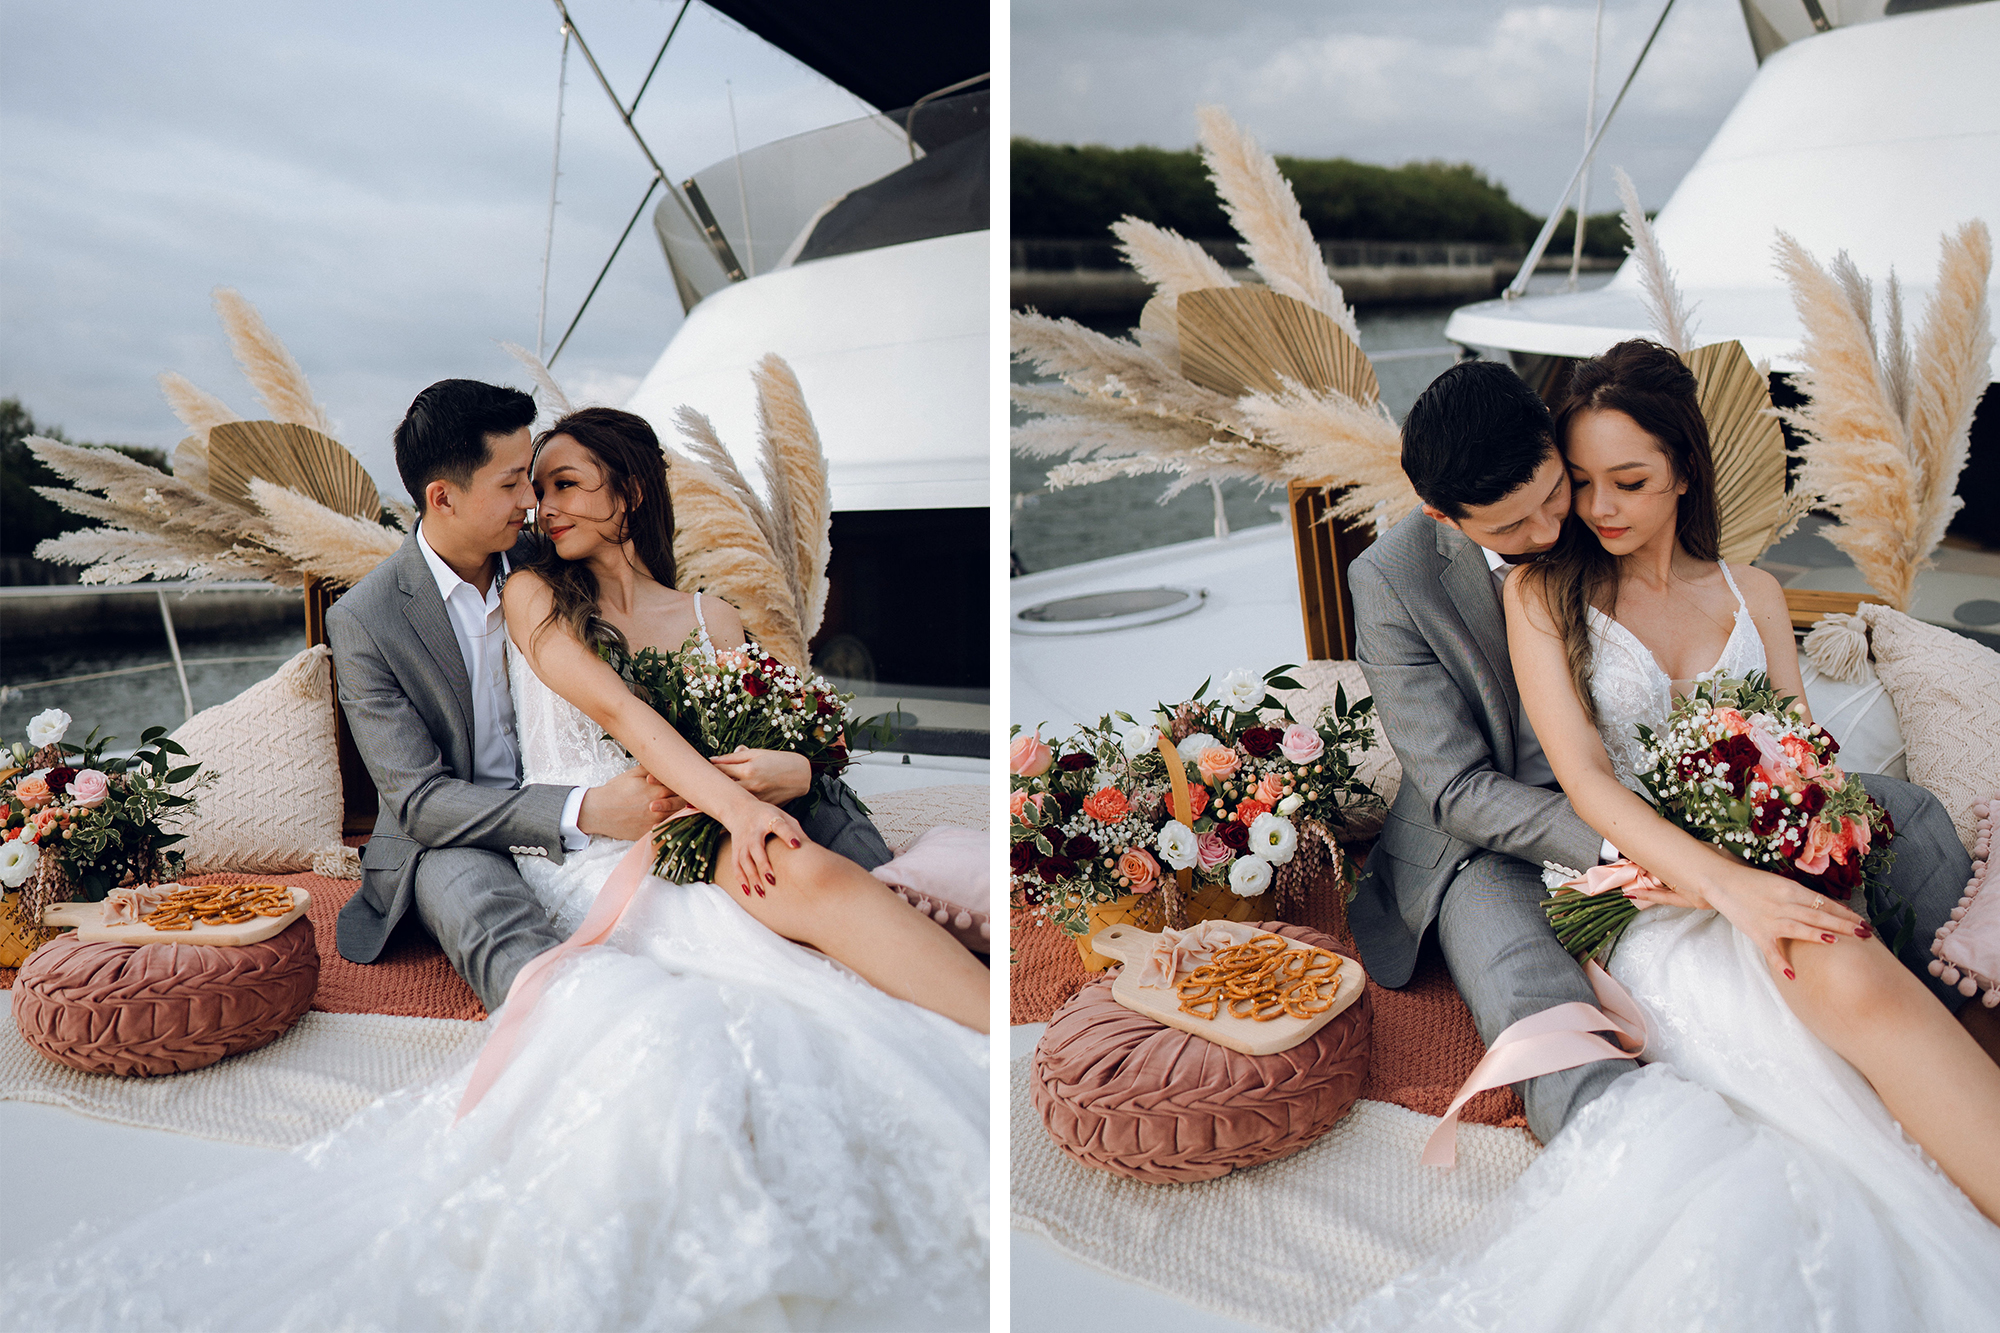 Sunset Prewedding Photoshoot On A Yacht With Romantic Floral Styling by Samantha on OneThreeOneFour 5